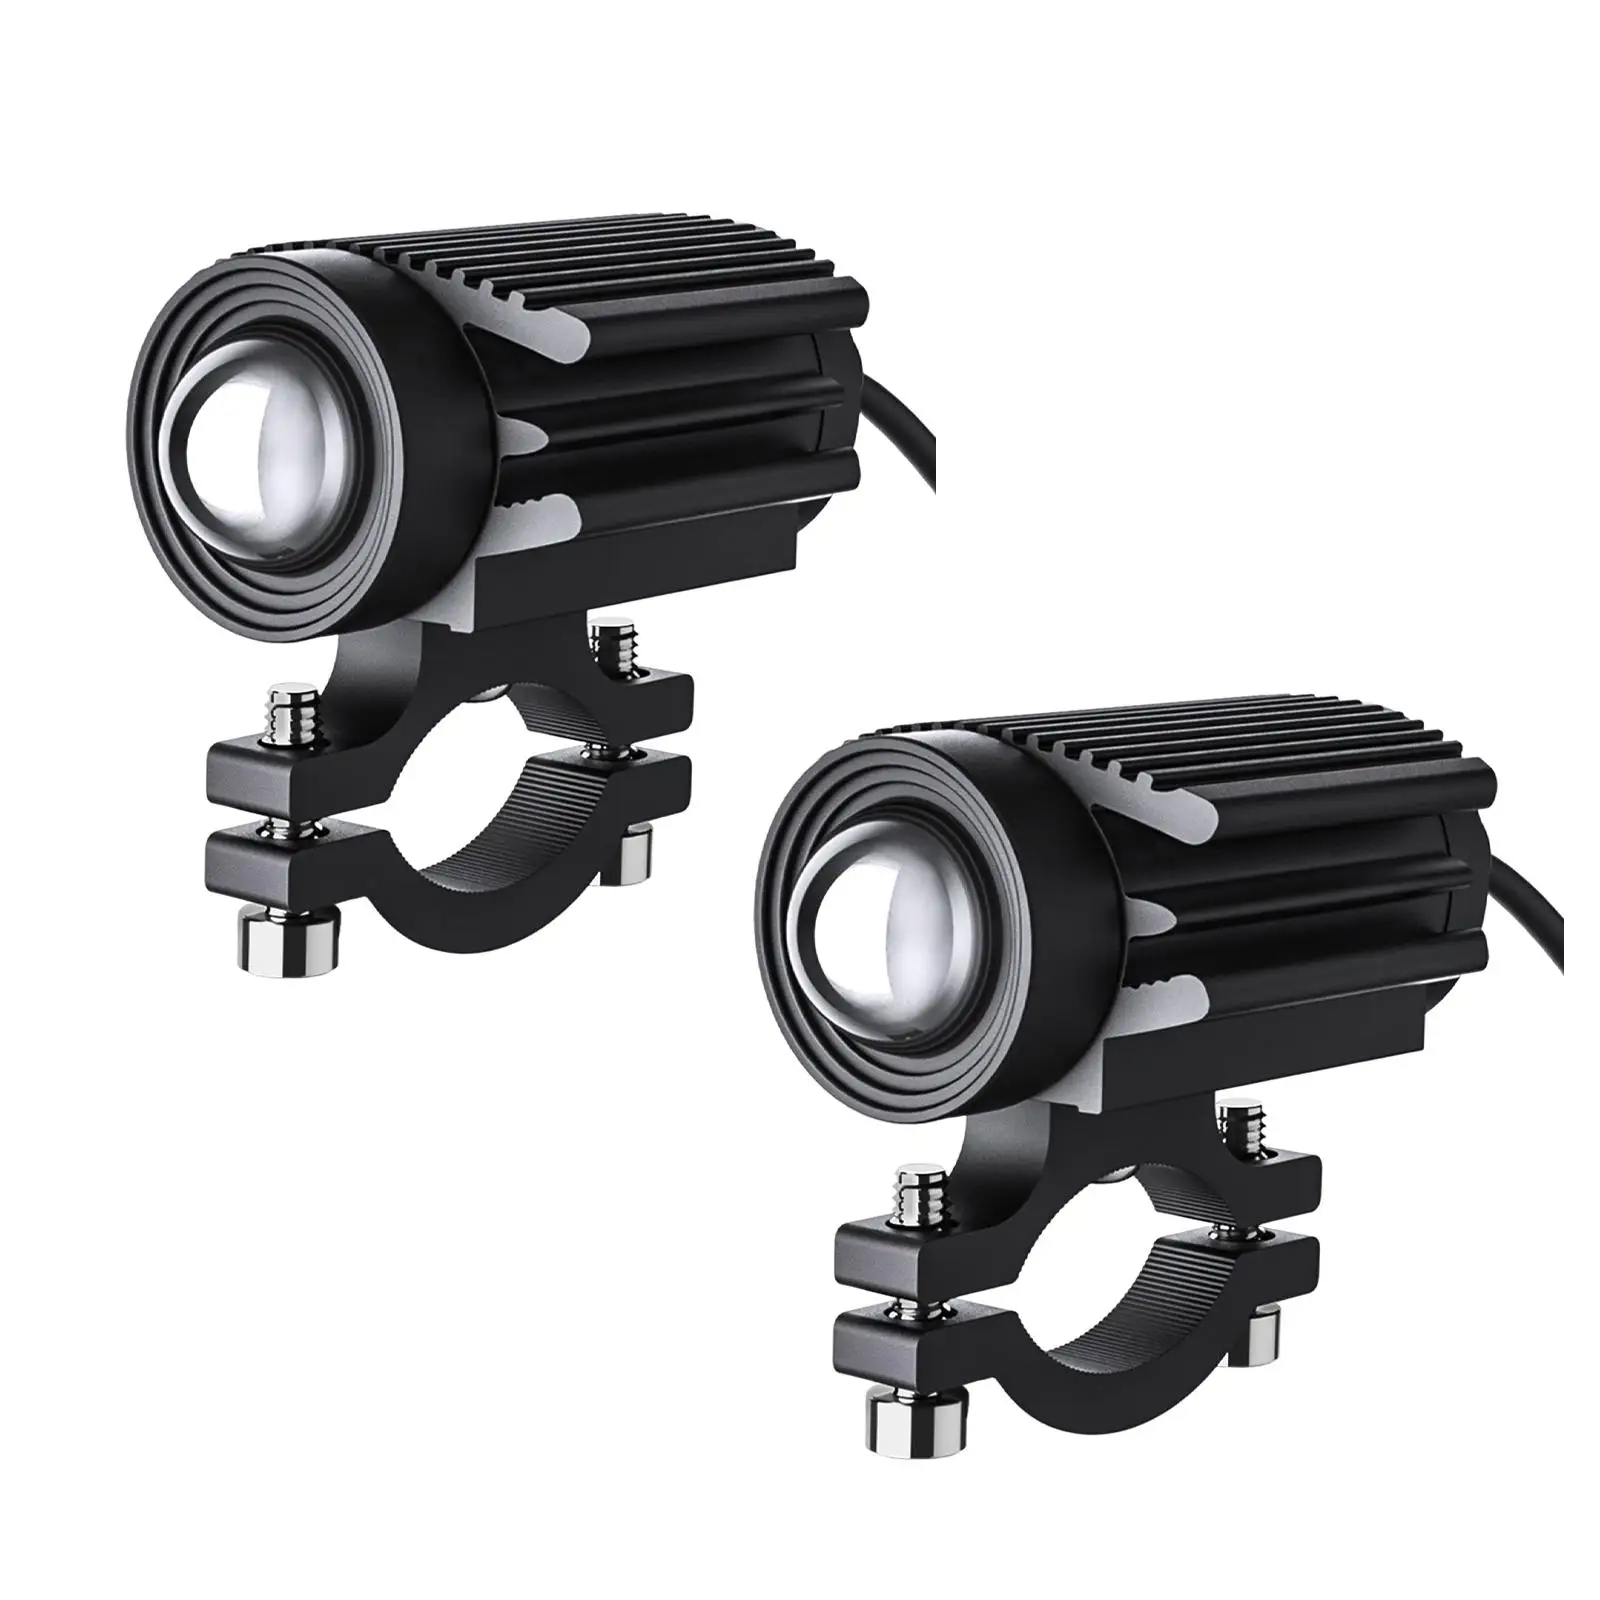 

2 Pieces Motorcycle Front Spotlights Low Power Consumption Aluminum Alloy Casing Auxiliary Lamp Accessories Motorcycle Foglights